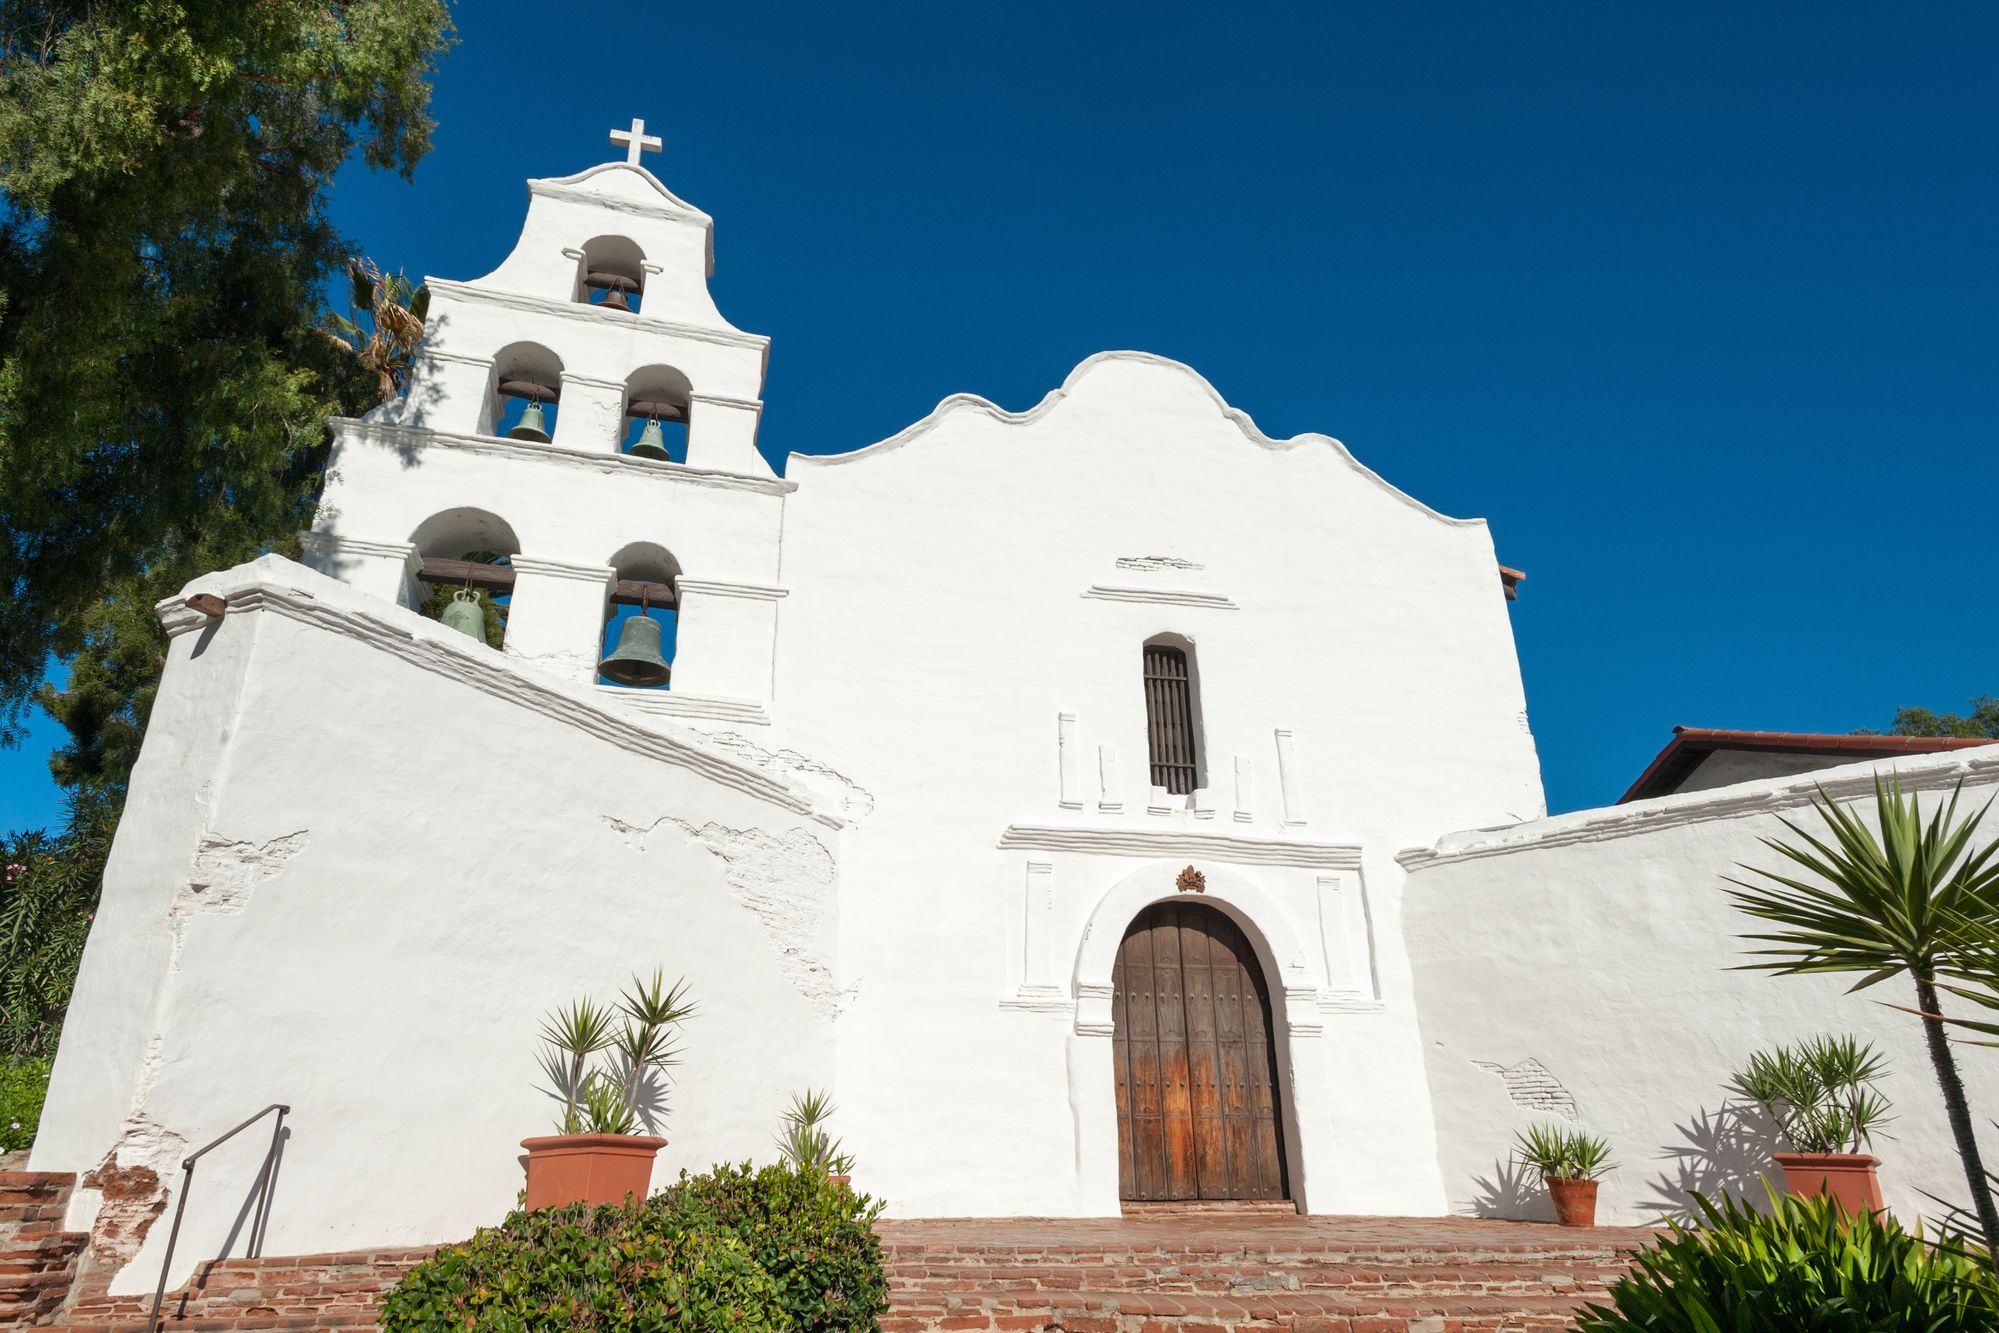 Facade of the San Diego Mission